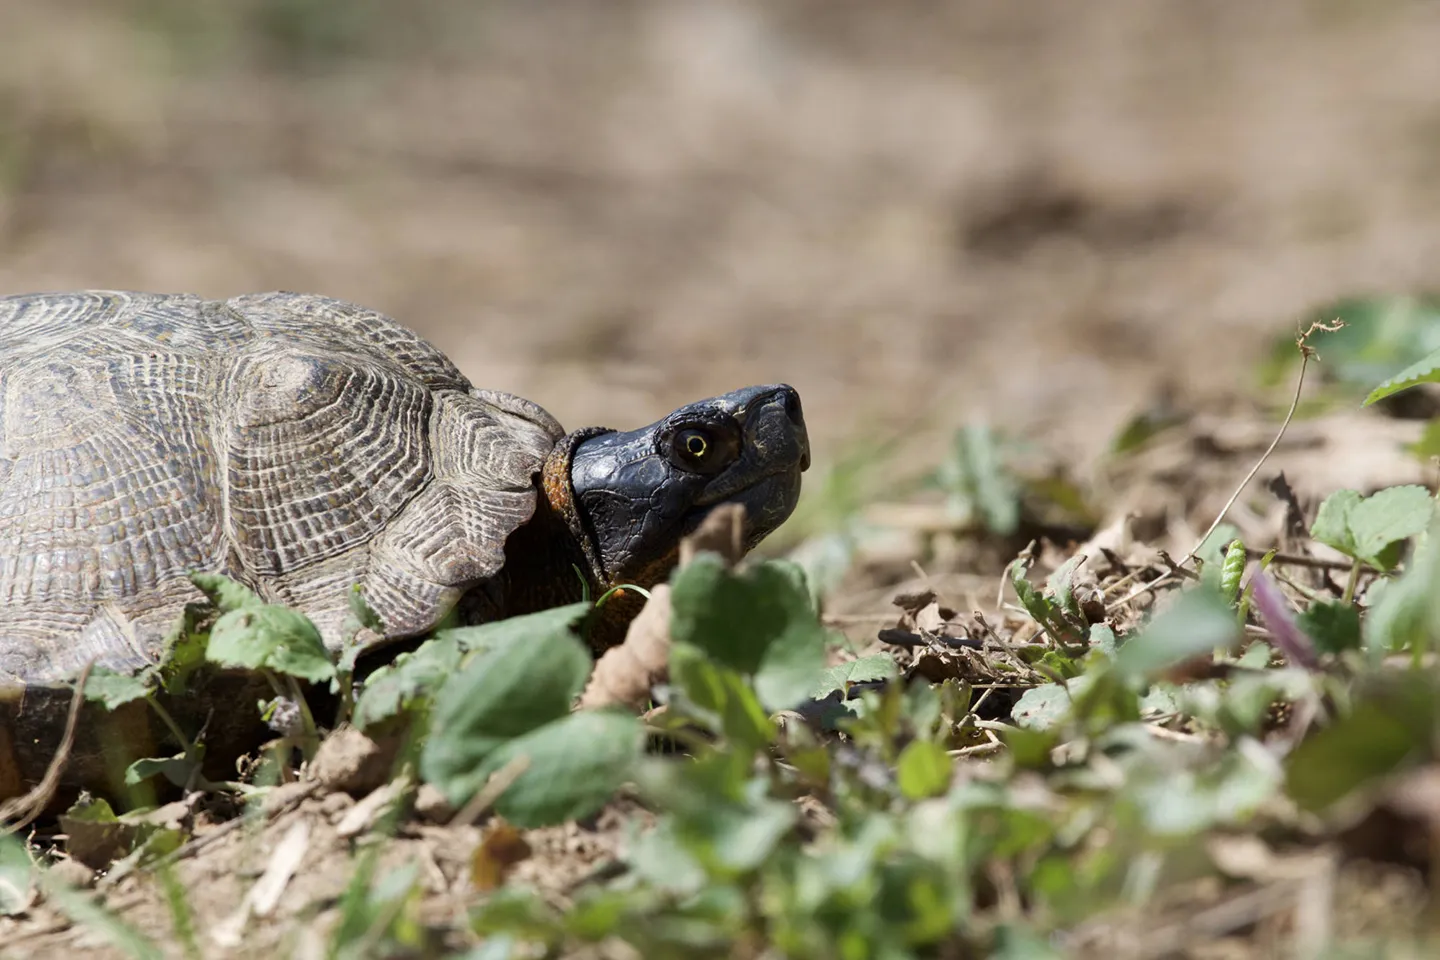 The wood turtle population is declining in New Jersey due to habitat degradation and vehicle mortality. Photo credit: Grayson Smith/USFWS.